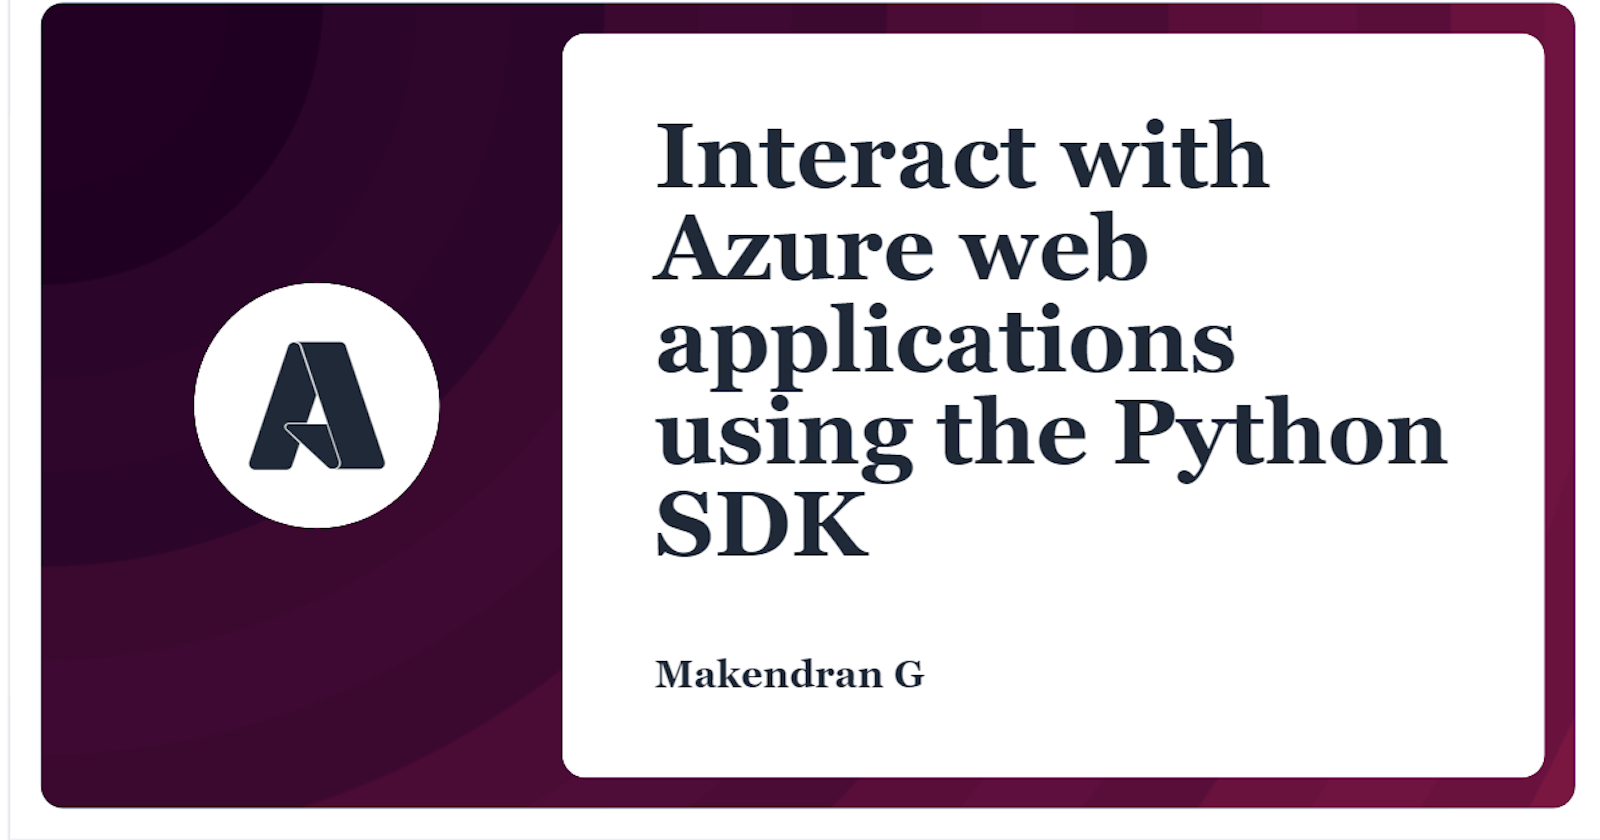 Interact with Azure web applications using the Python SDK